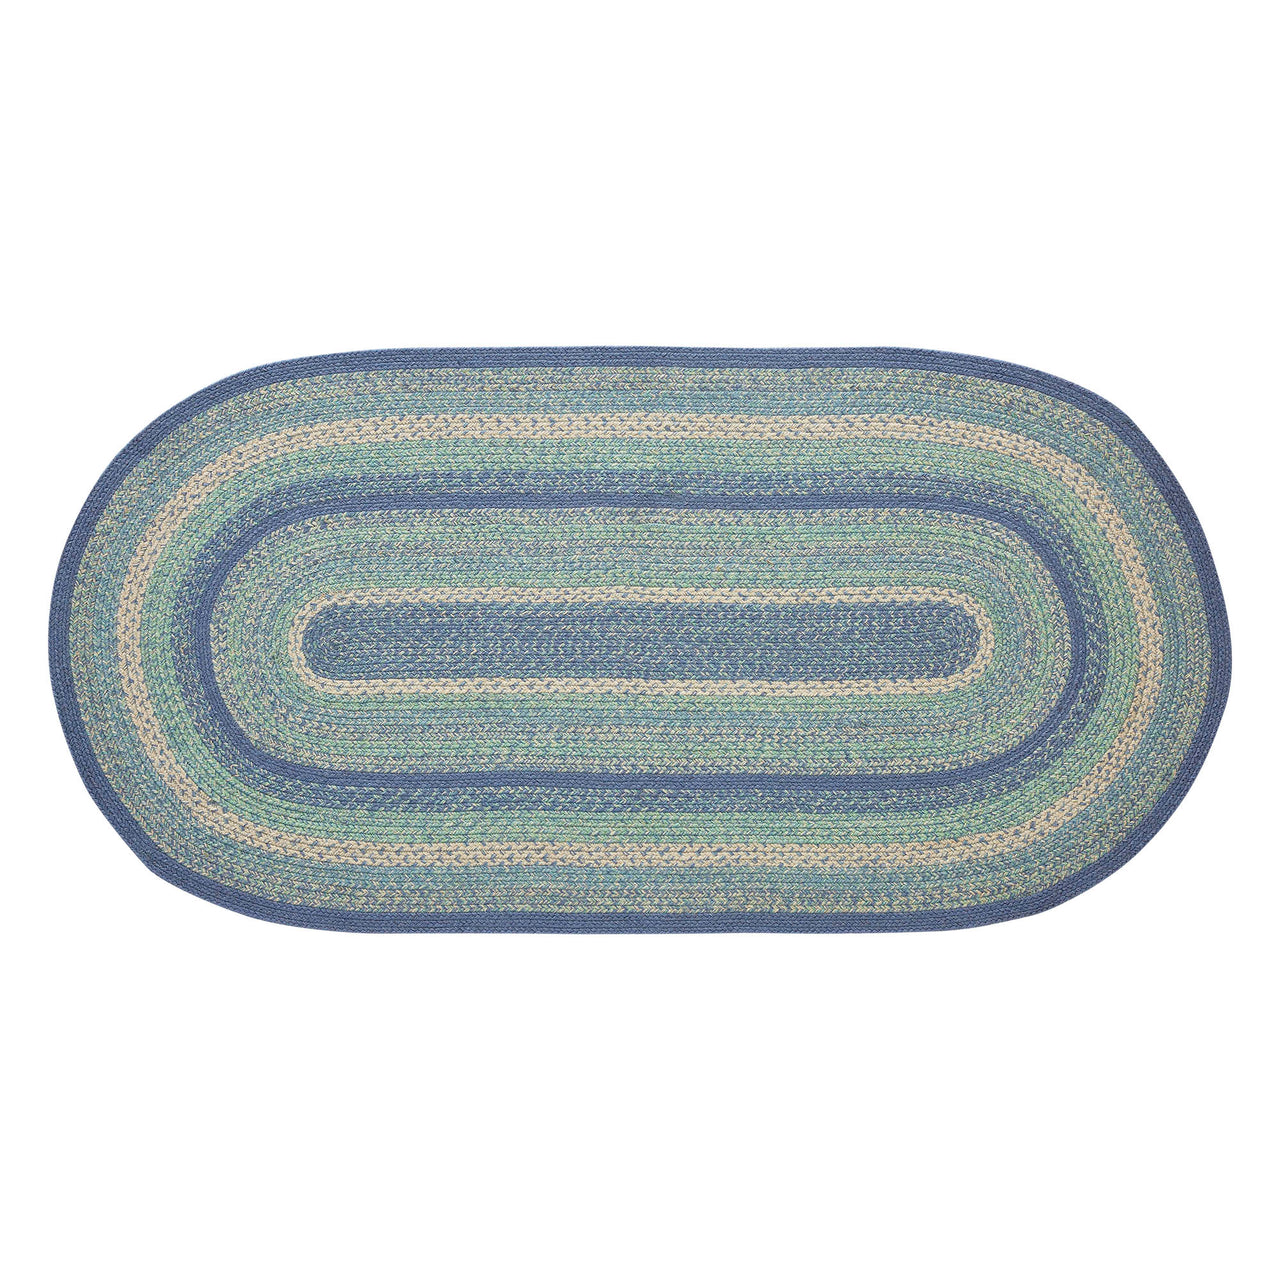 Jolie Braided Jute Oval Braided Rugs with Rug Pad - VHC Brands